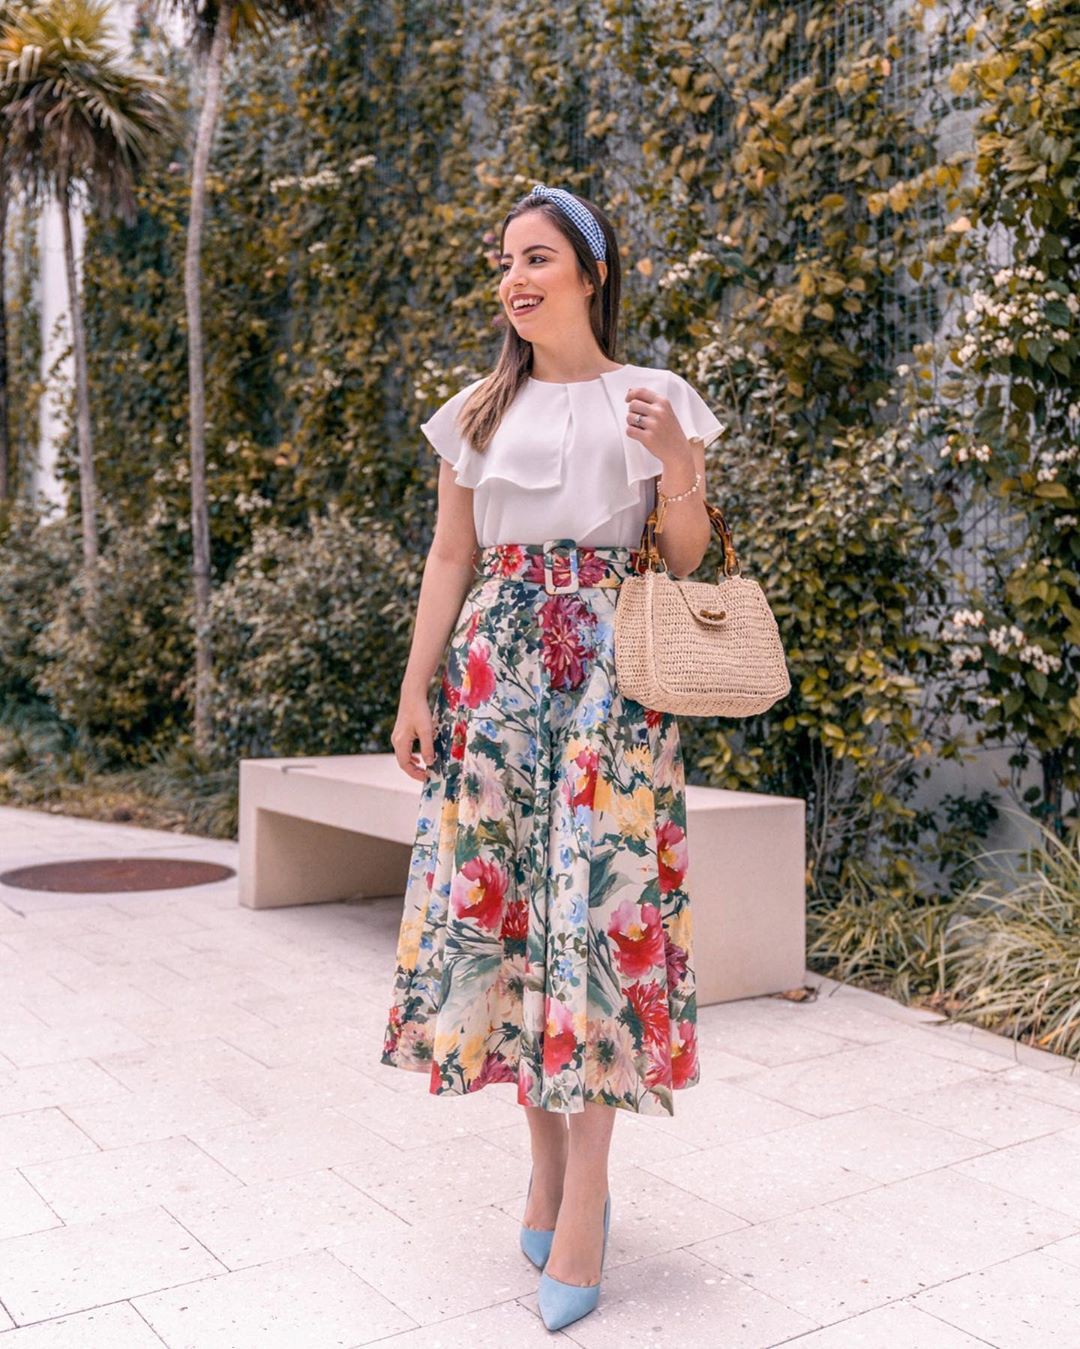 Outfit Ideas For Church, Floral Skirt, Modest fashion | Outfit Ideas